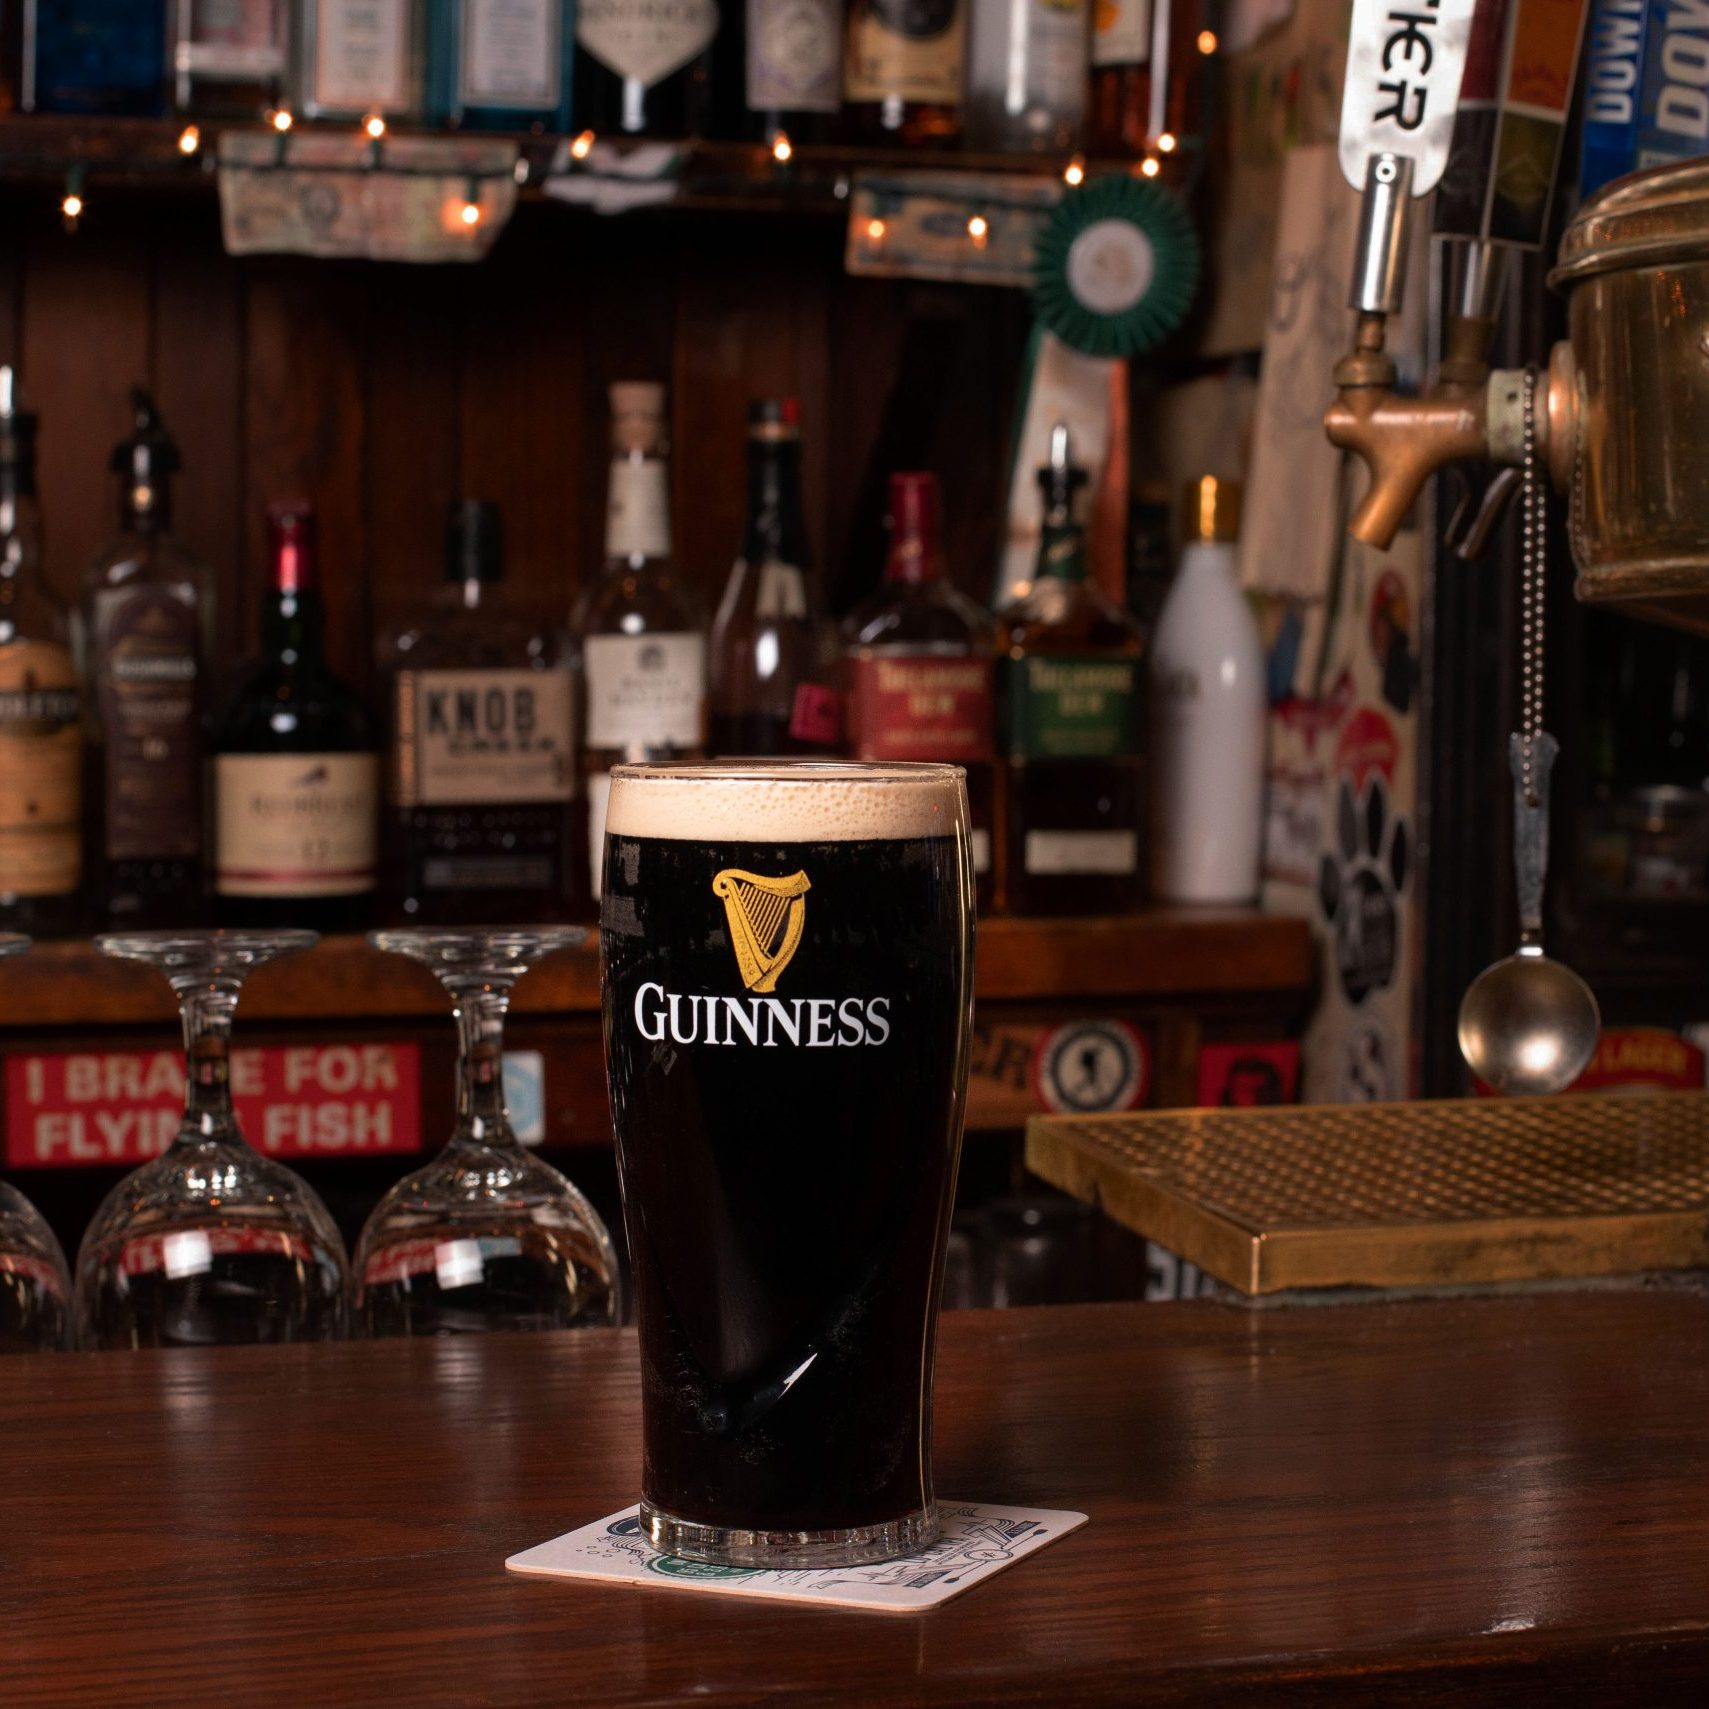 A glass of guinness sitting on a bar.